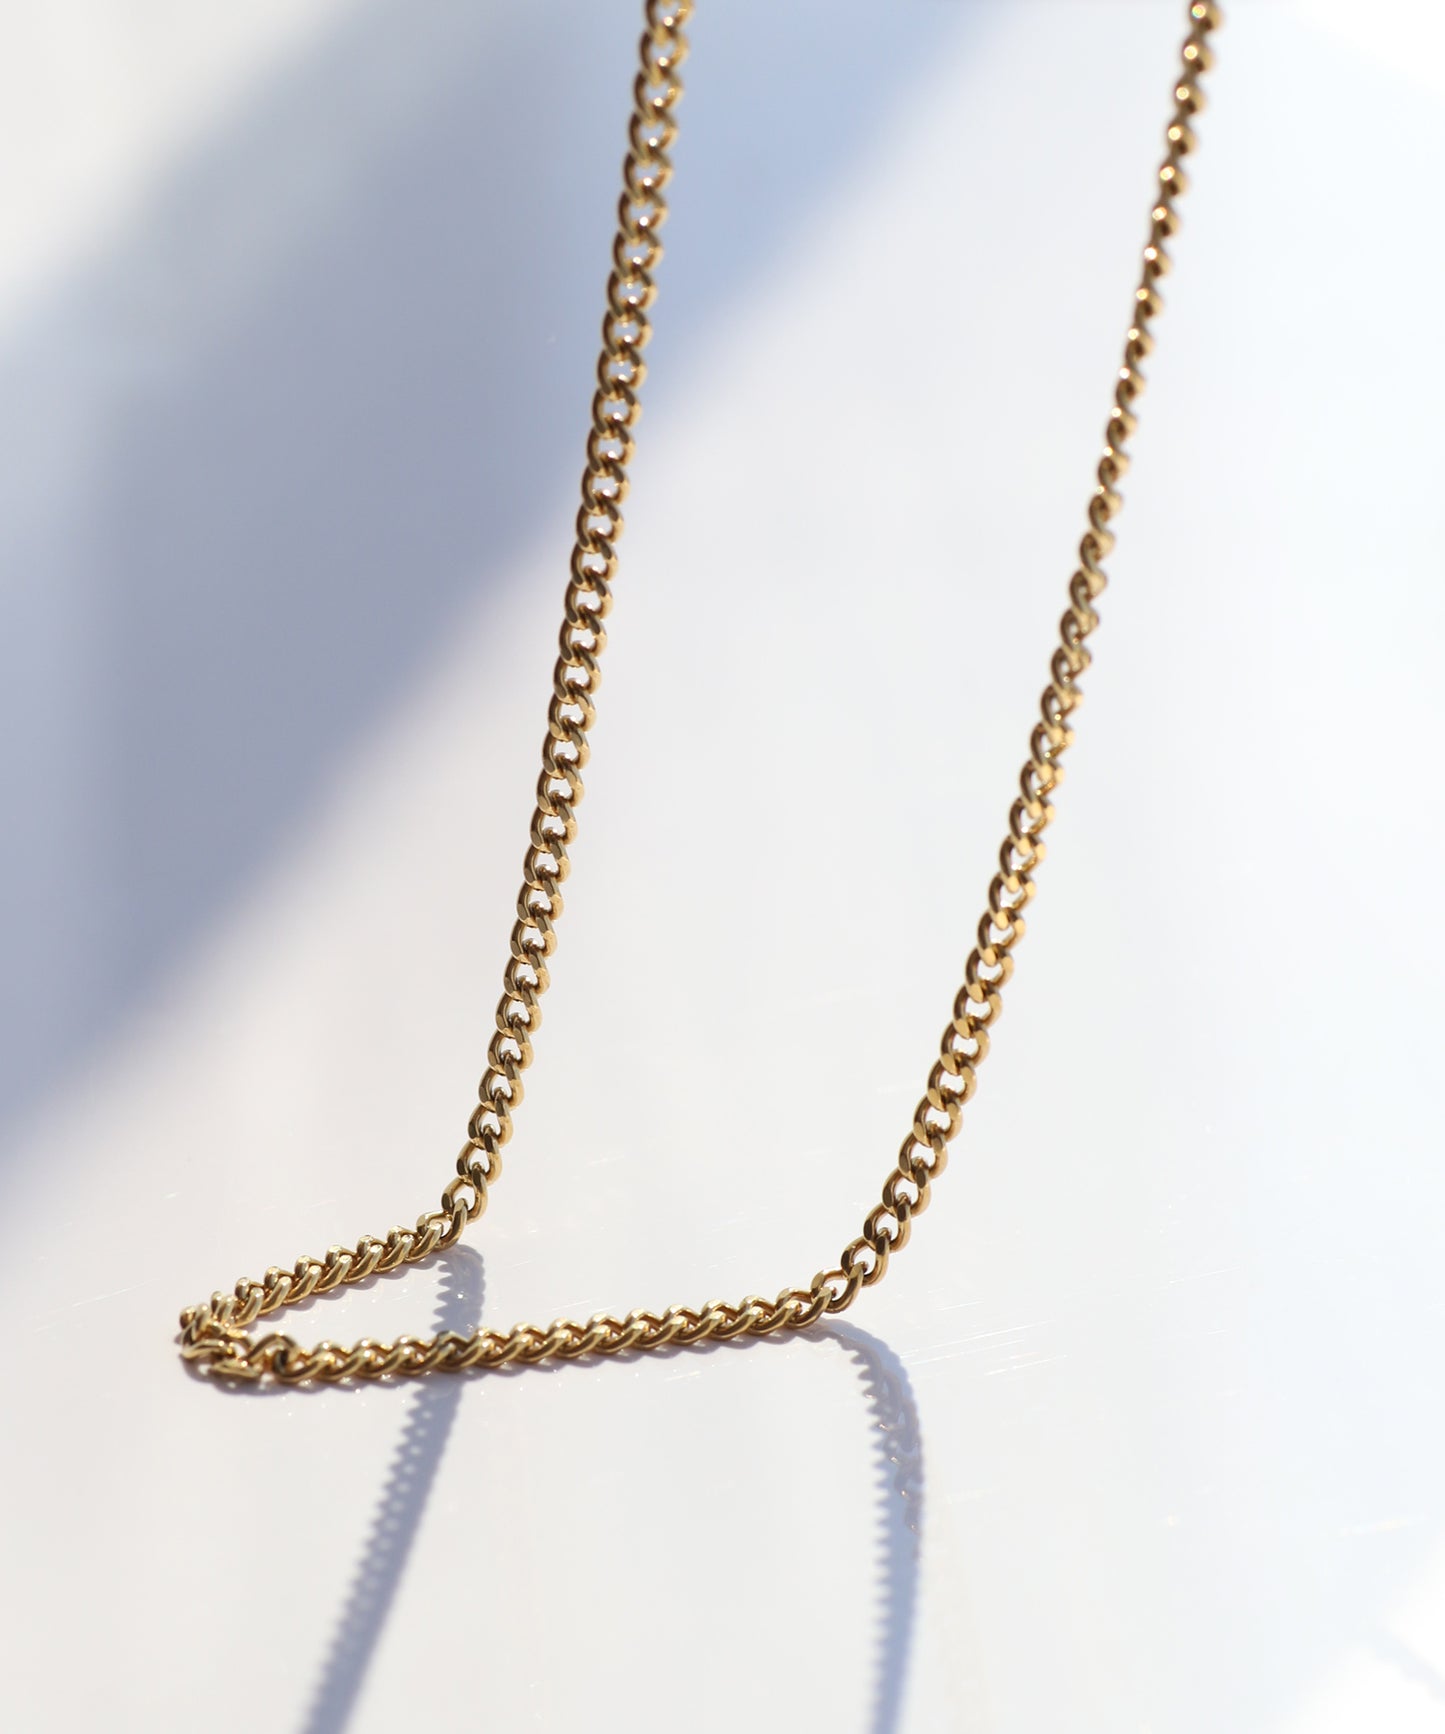 【Stainless Steel IP】Chain Necklace [D]